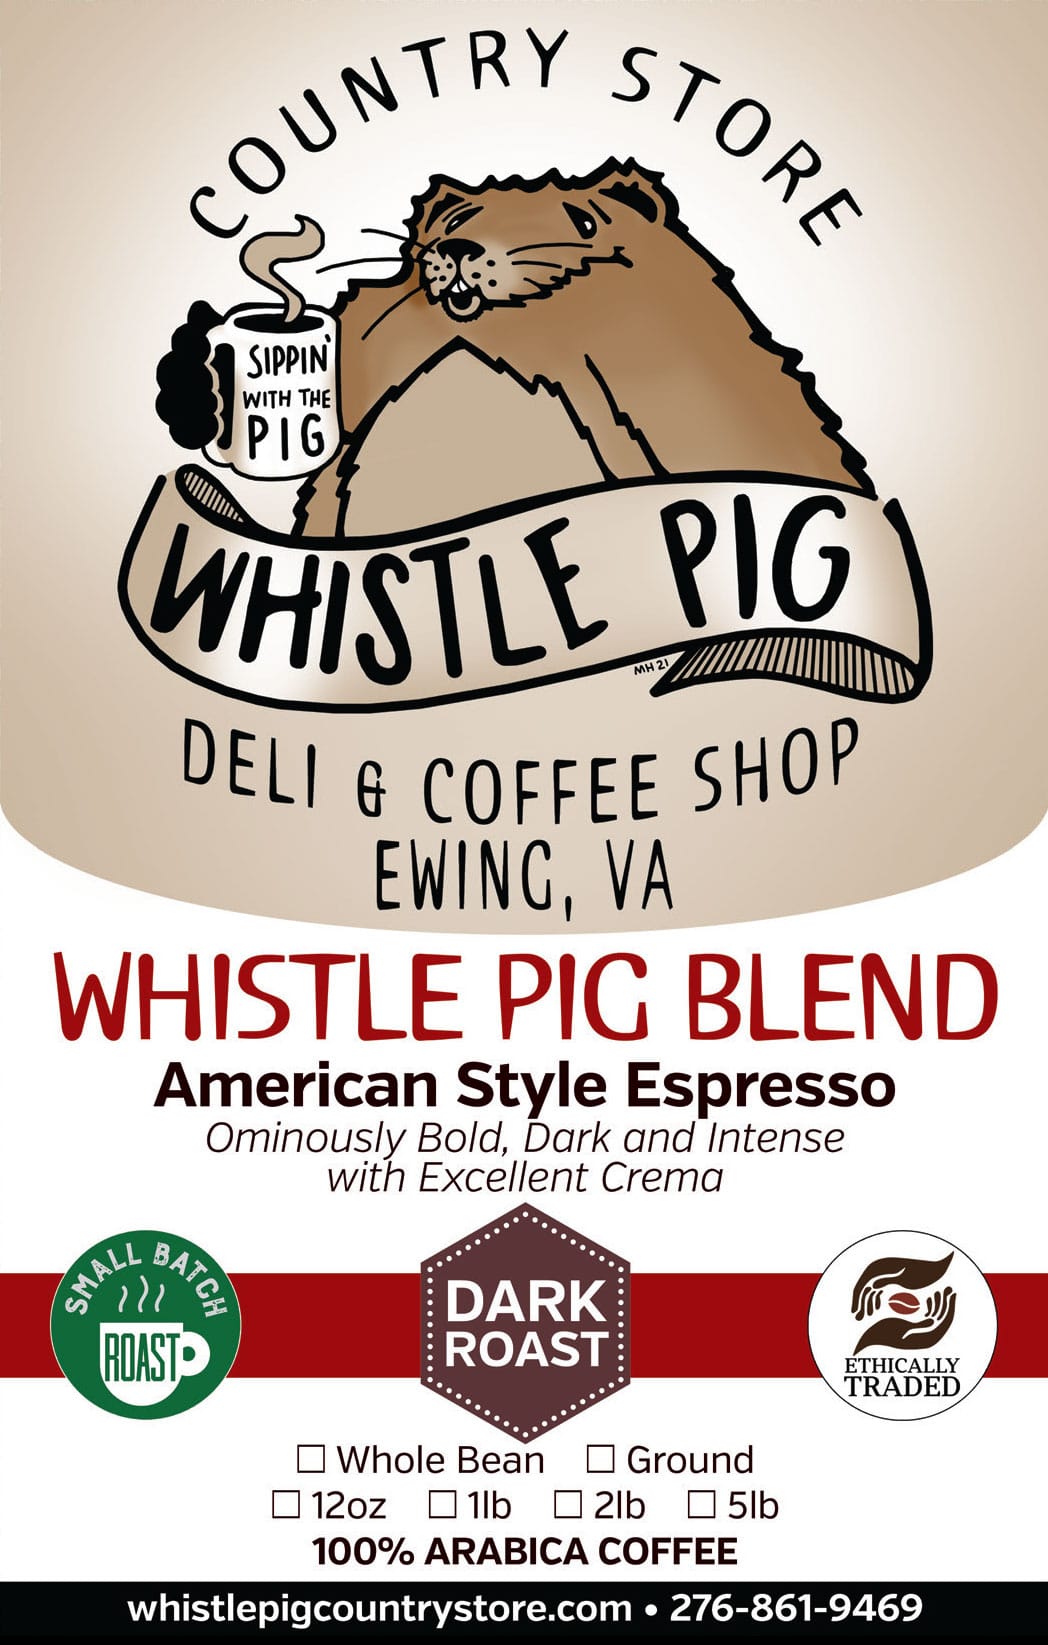 Coffee bag label of Whistle Pig Blend: American Style Espresso with Whistle Pig logo